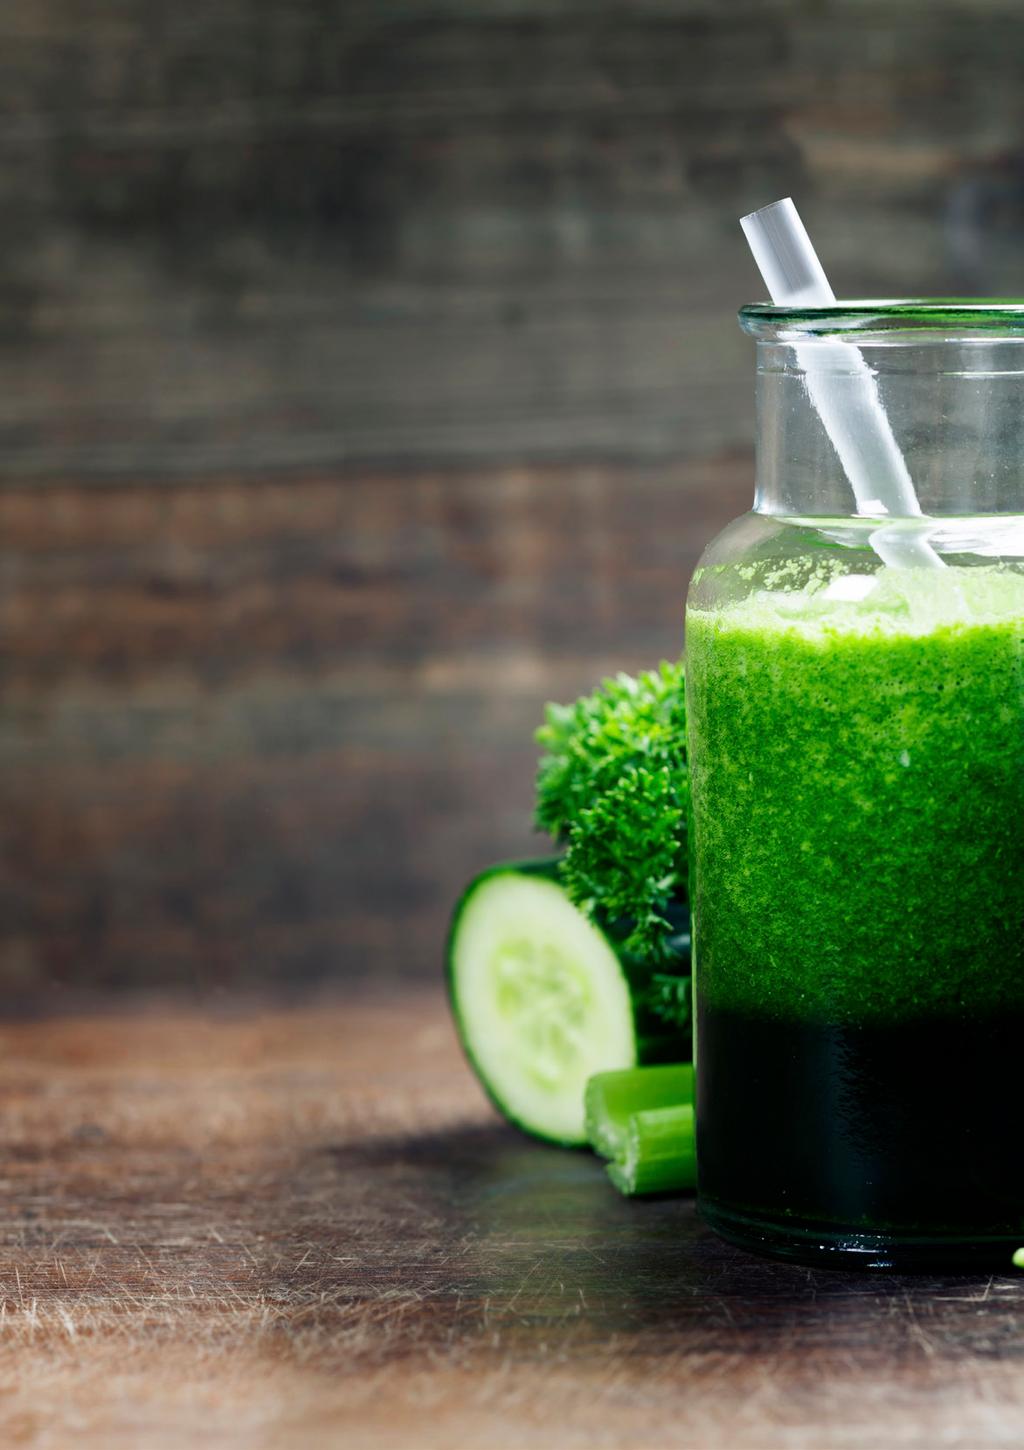 Radiant Skin Smoothie Wheatgrass and Spirulina are rich in many vitamins and minerals that contribute to the maintenance of normal skin, hair and nails.